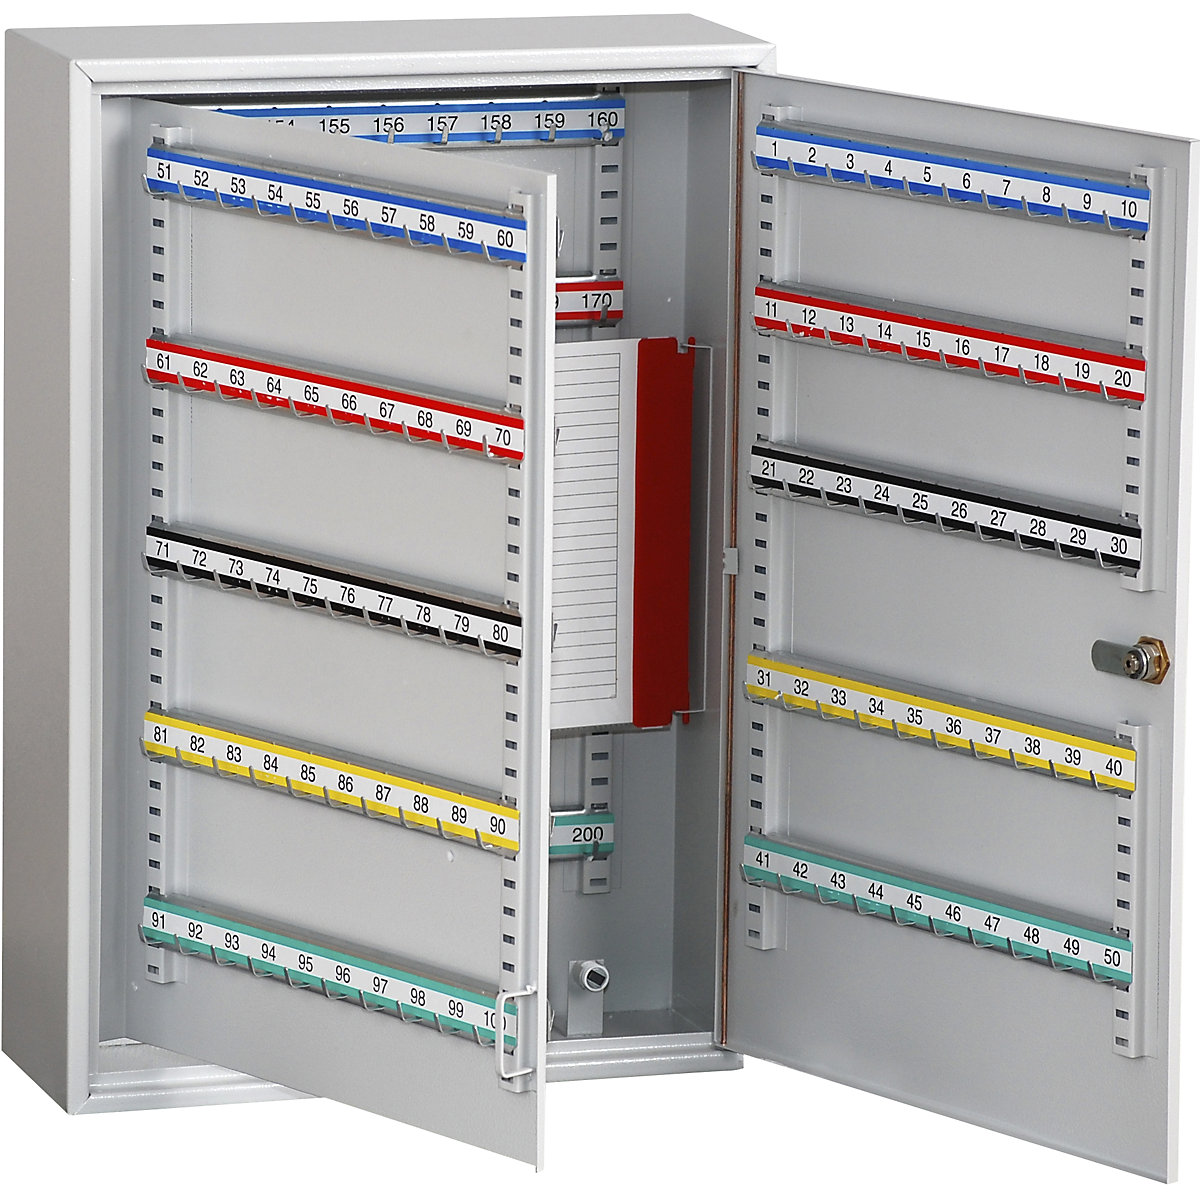 Security key cabinets